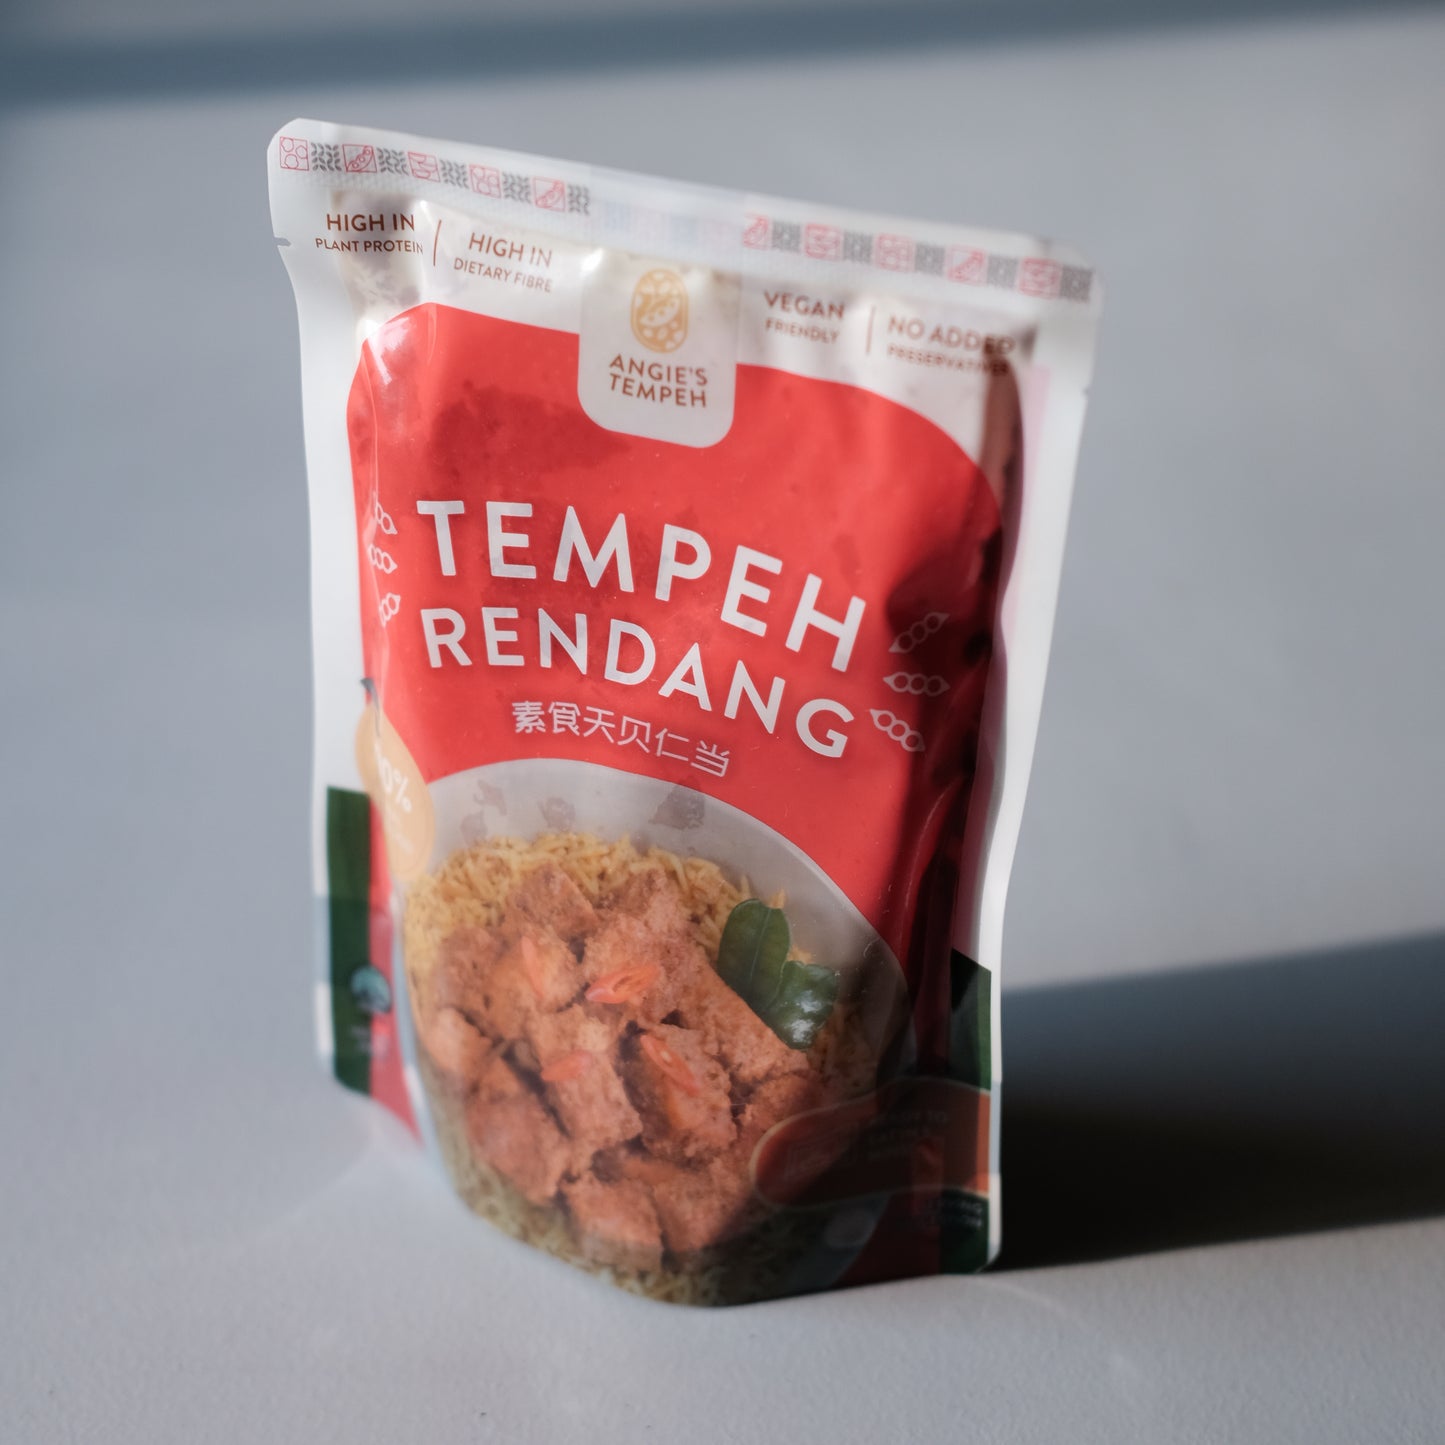 Angie's Tempeh Rendang (BRAND NEW!)